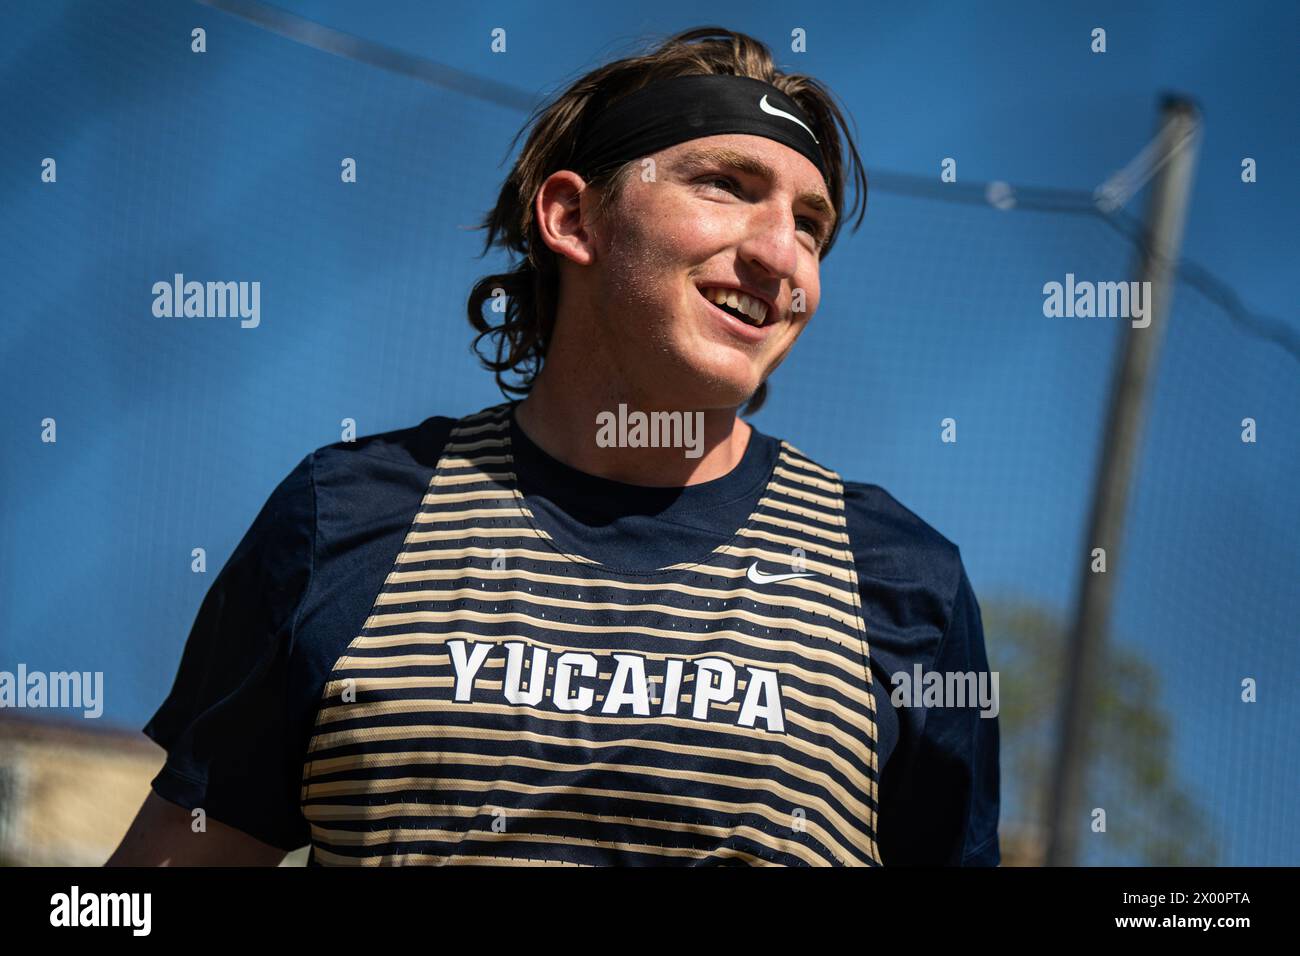 Benjamin Lingenfelter of Yucaipa reacts after a throw in the invitational discus throw during the 56th Arcadia Invitational high school track meet, Sa Stock Photo